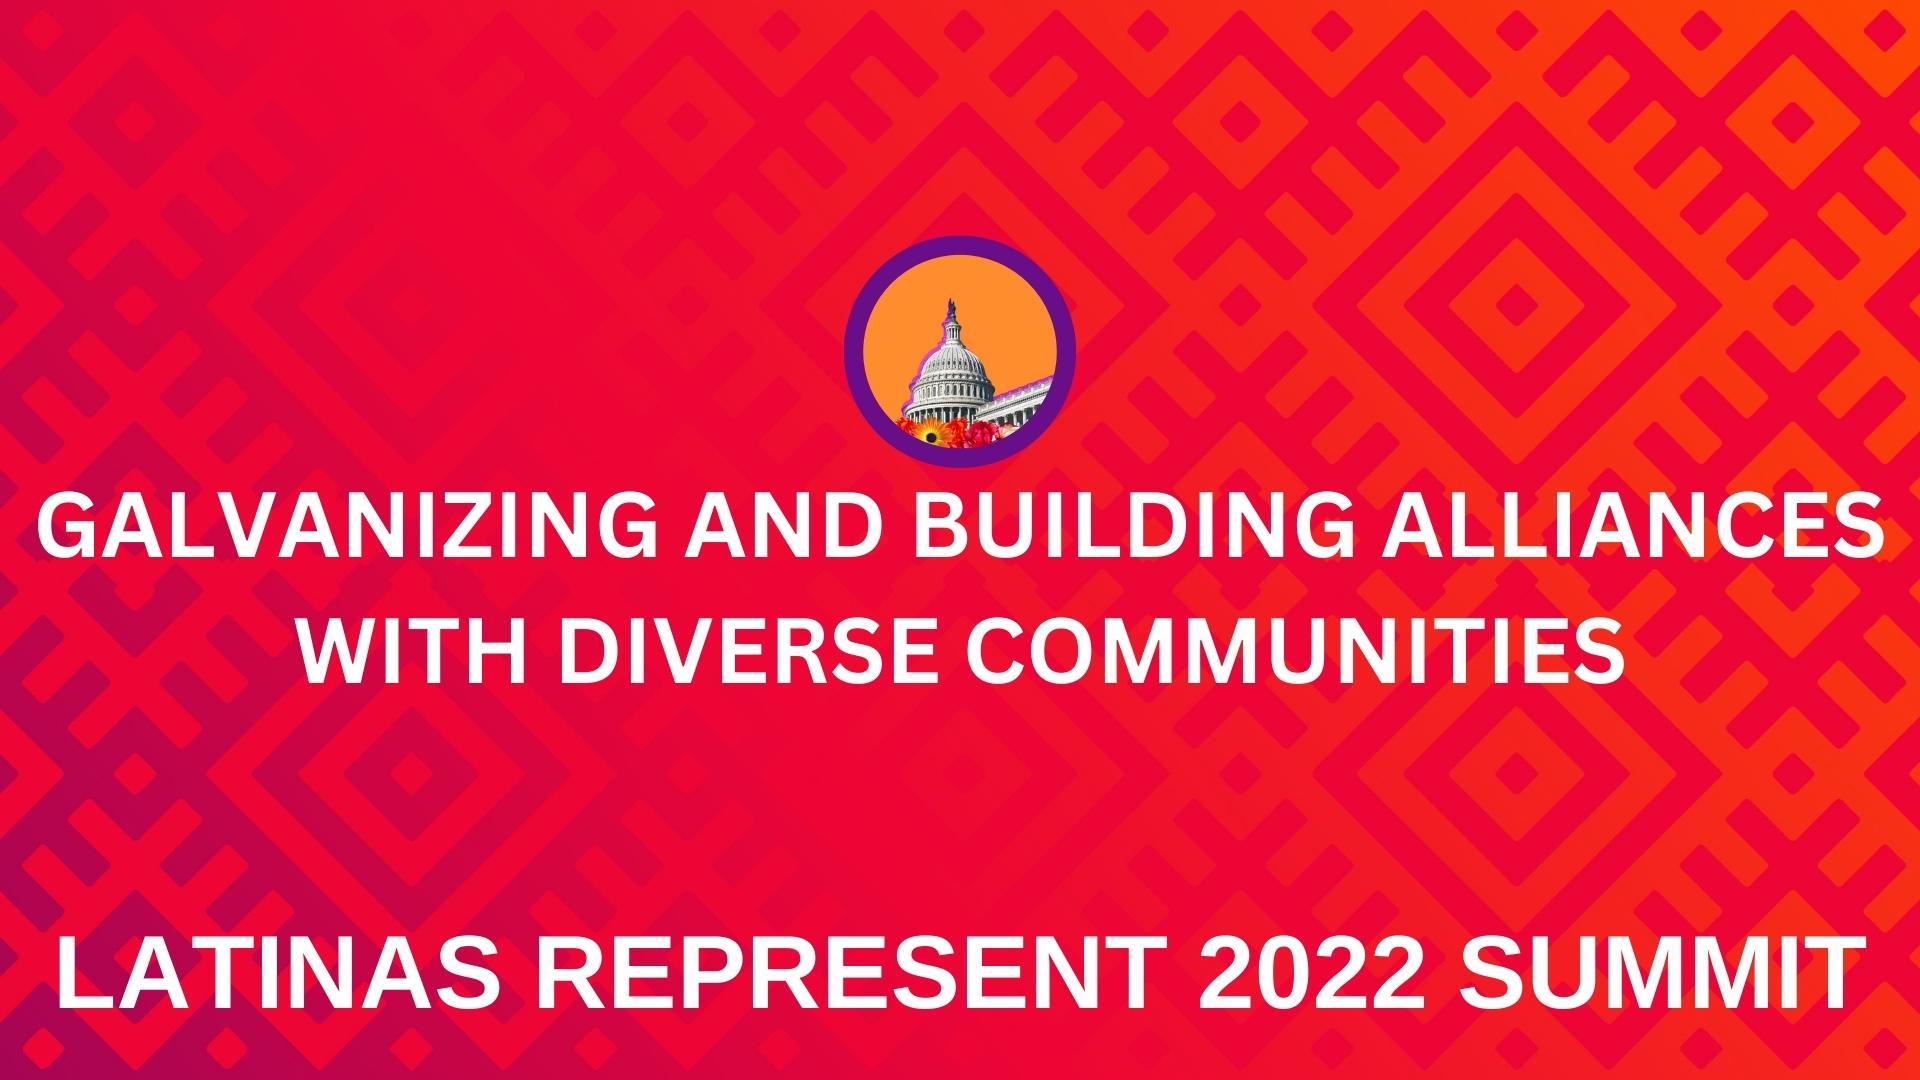 Galvanizing and Building Alliances with Diverse Communities